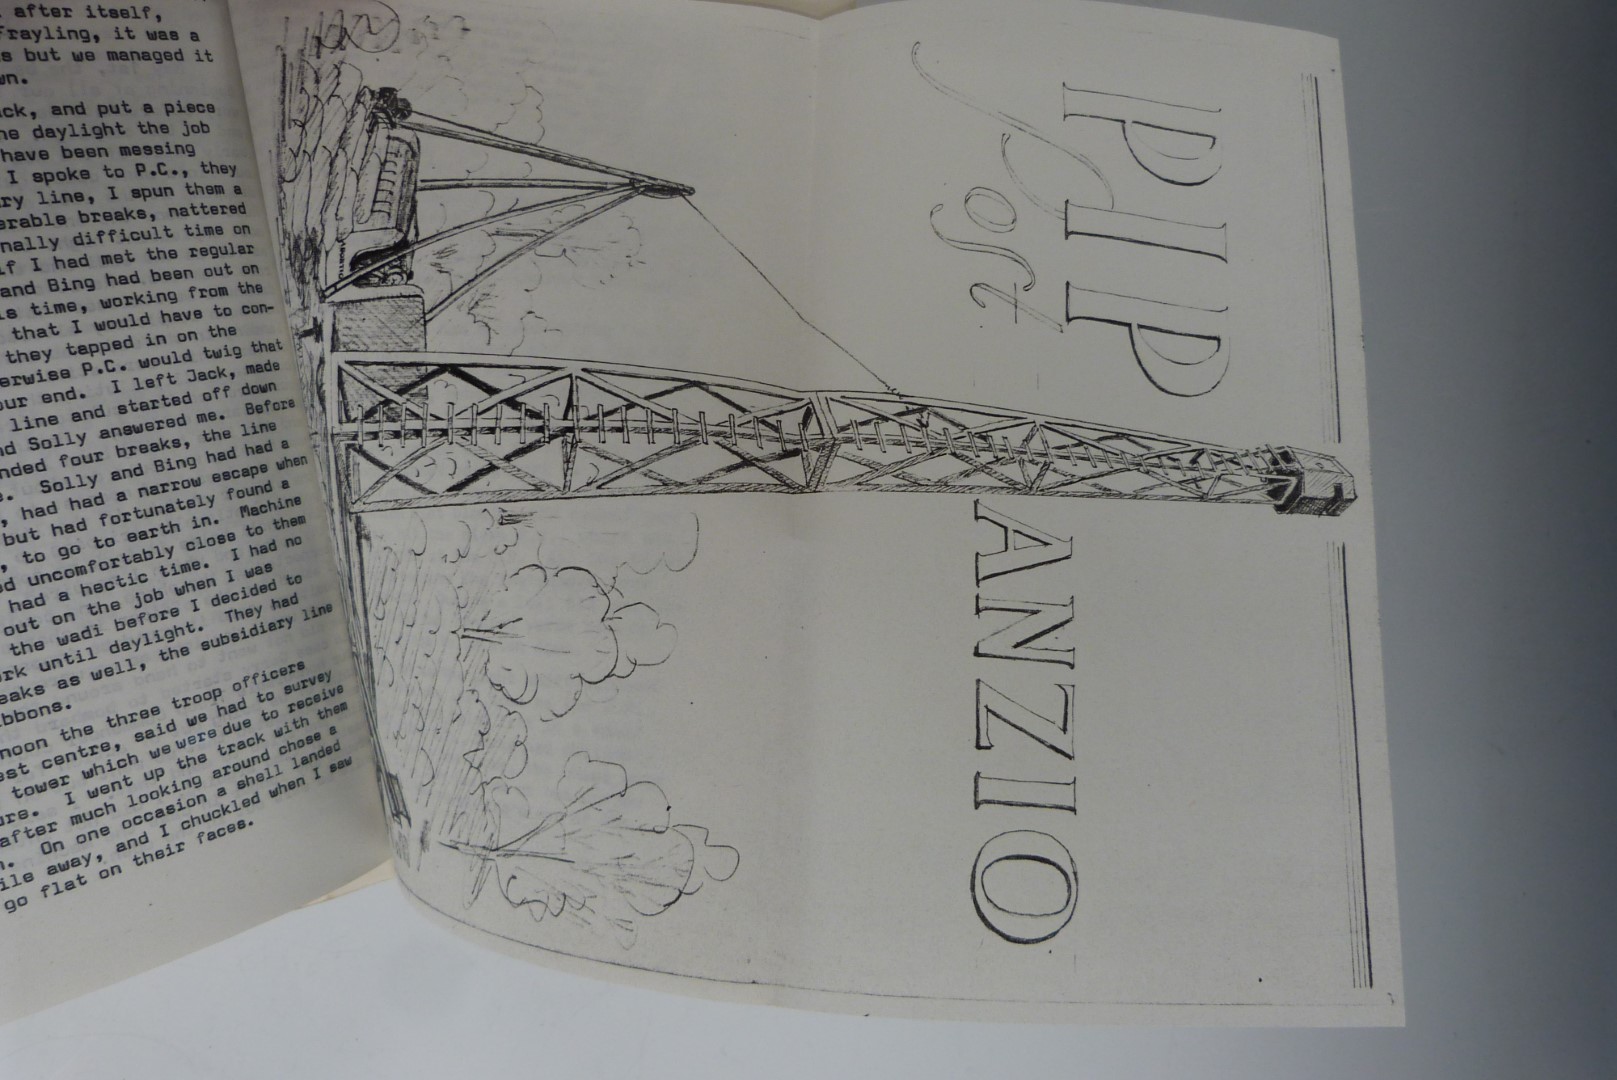 WW2 book 100 Days at Anzio by H C A P Dunn, Royal Artillery, believed to be an unpublished - Image 3 of 5